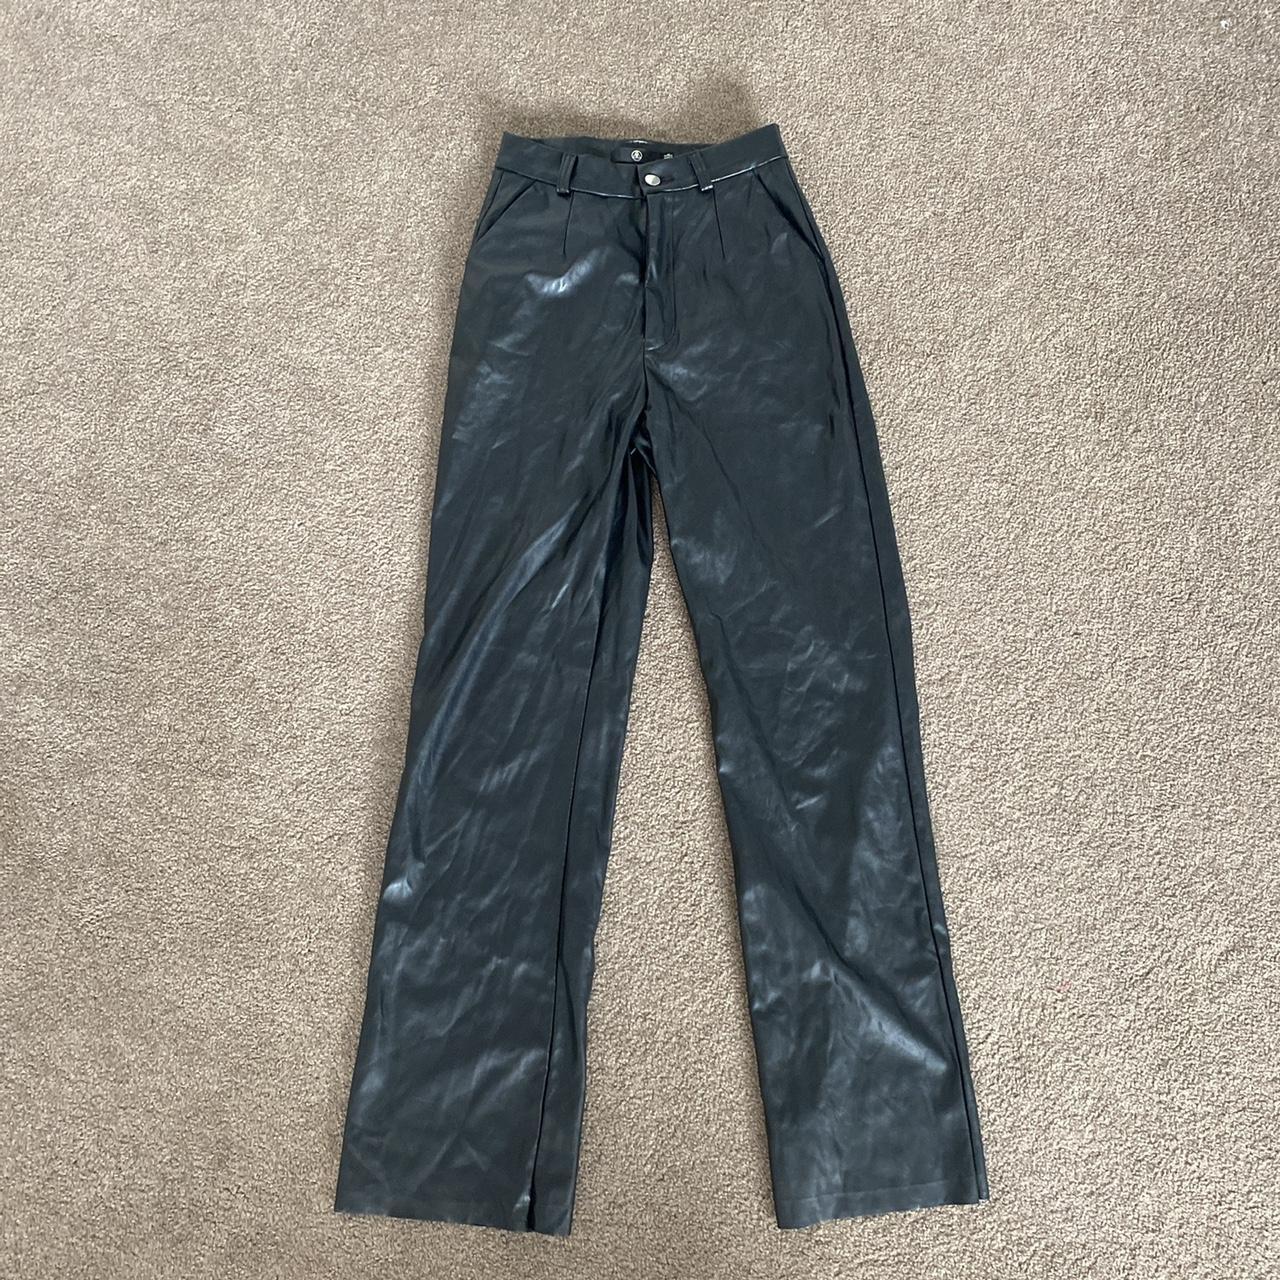 Misguided Black leather pants size small #lioness... - Depop